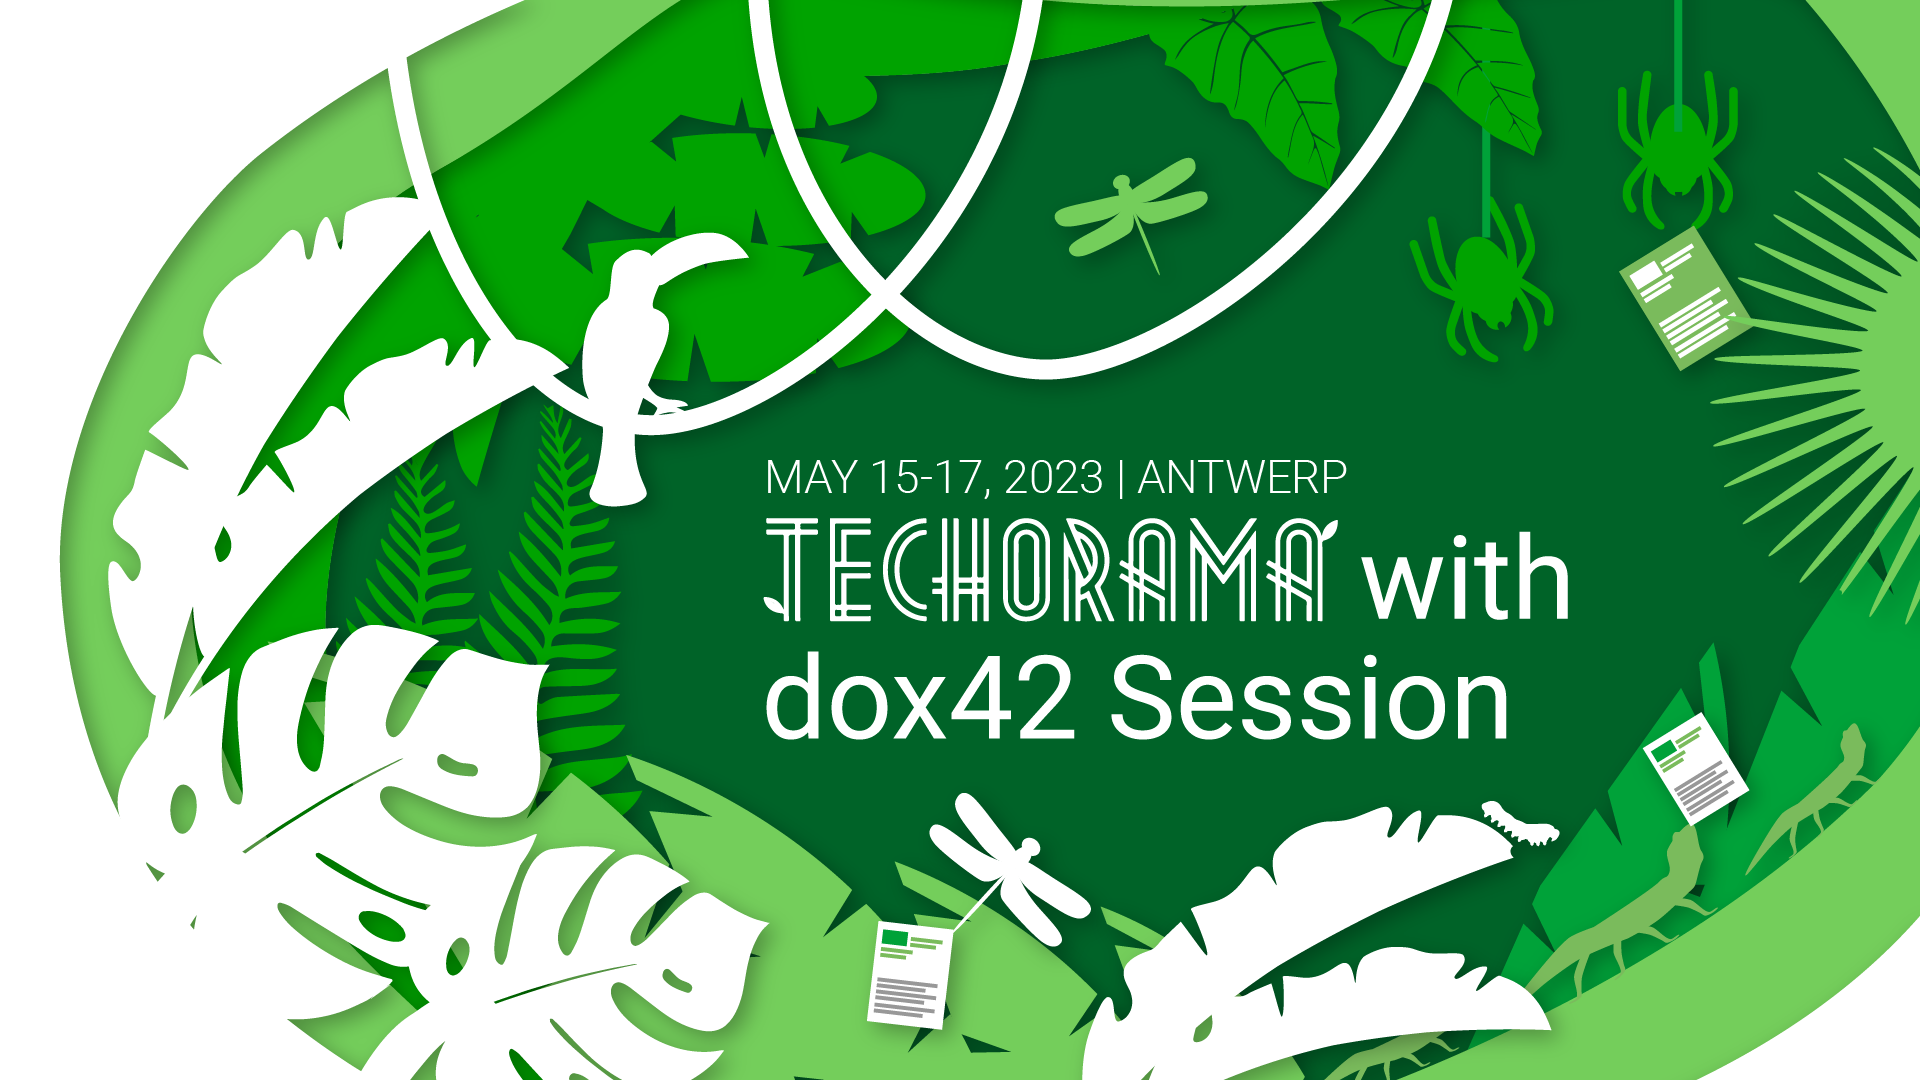 Techorama with dox42